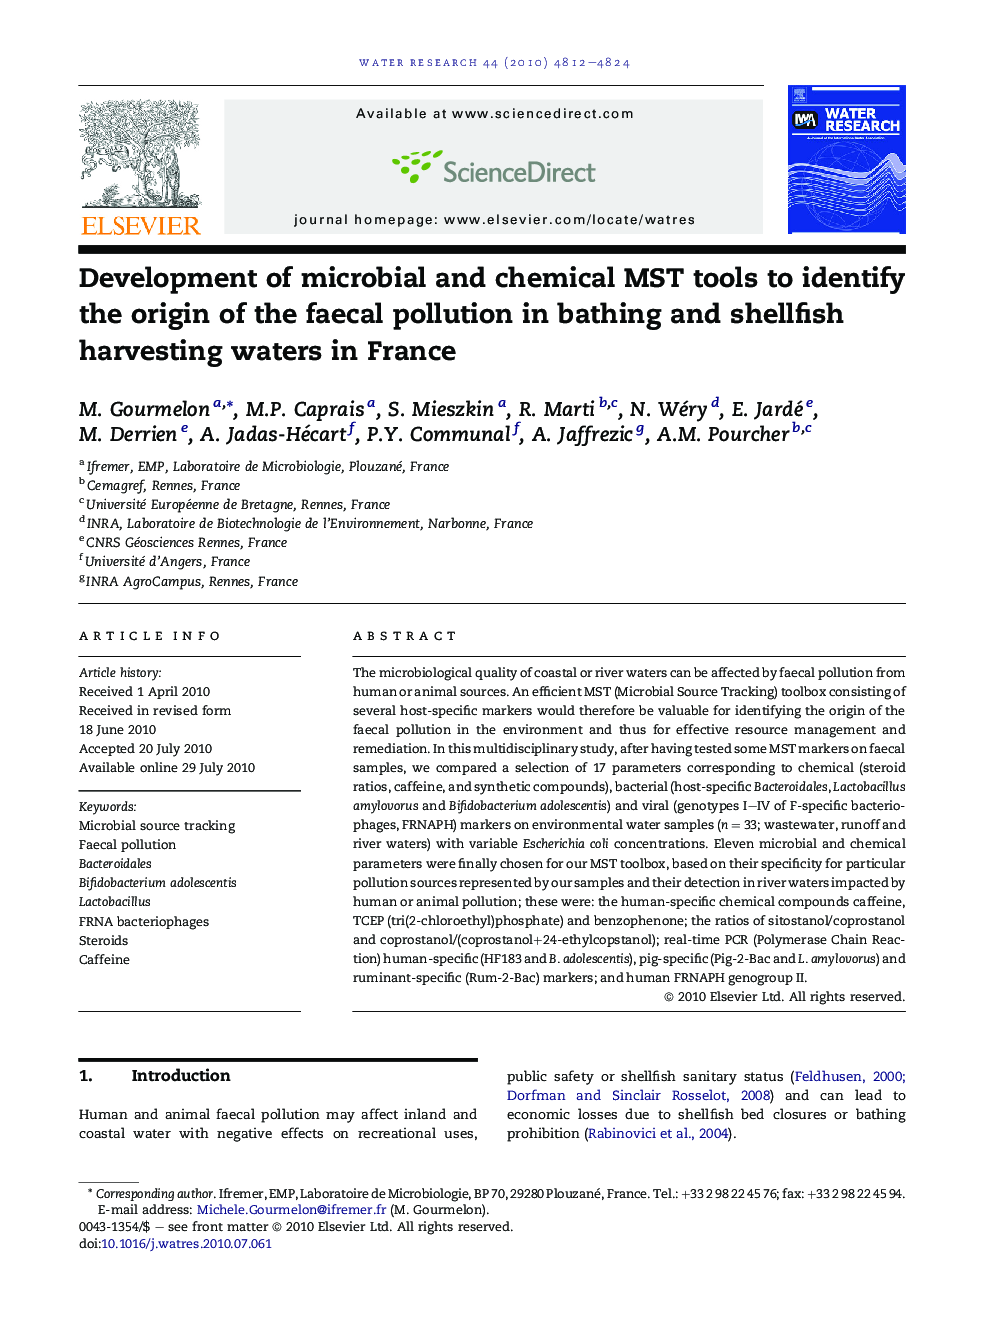 Development of microbial and chemical MST tools to identify the origin of the faecal pollution in bathing and shellfish harvesting waters in France